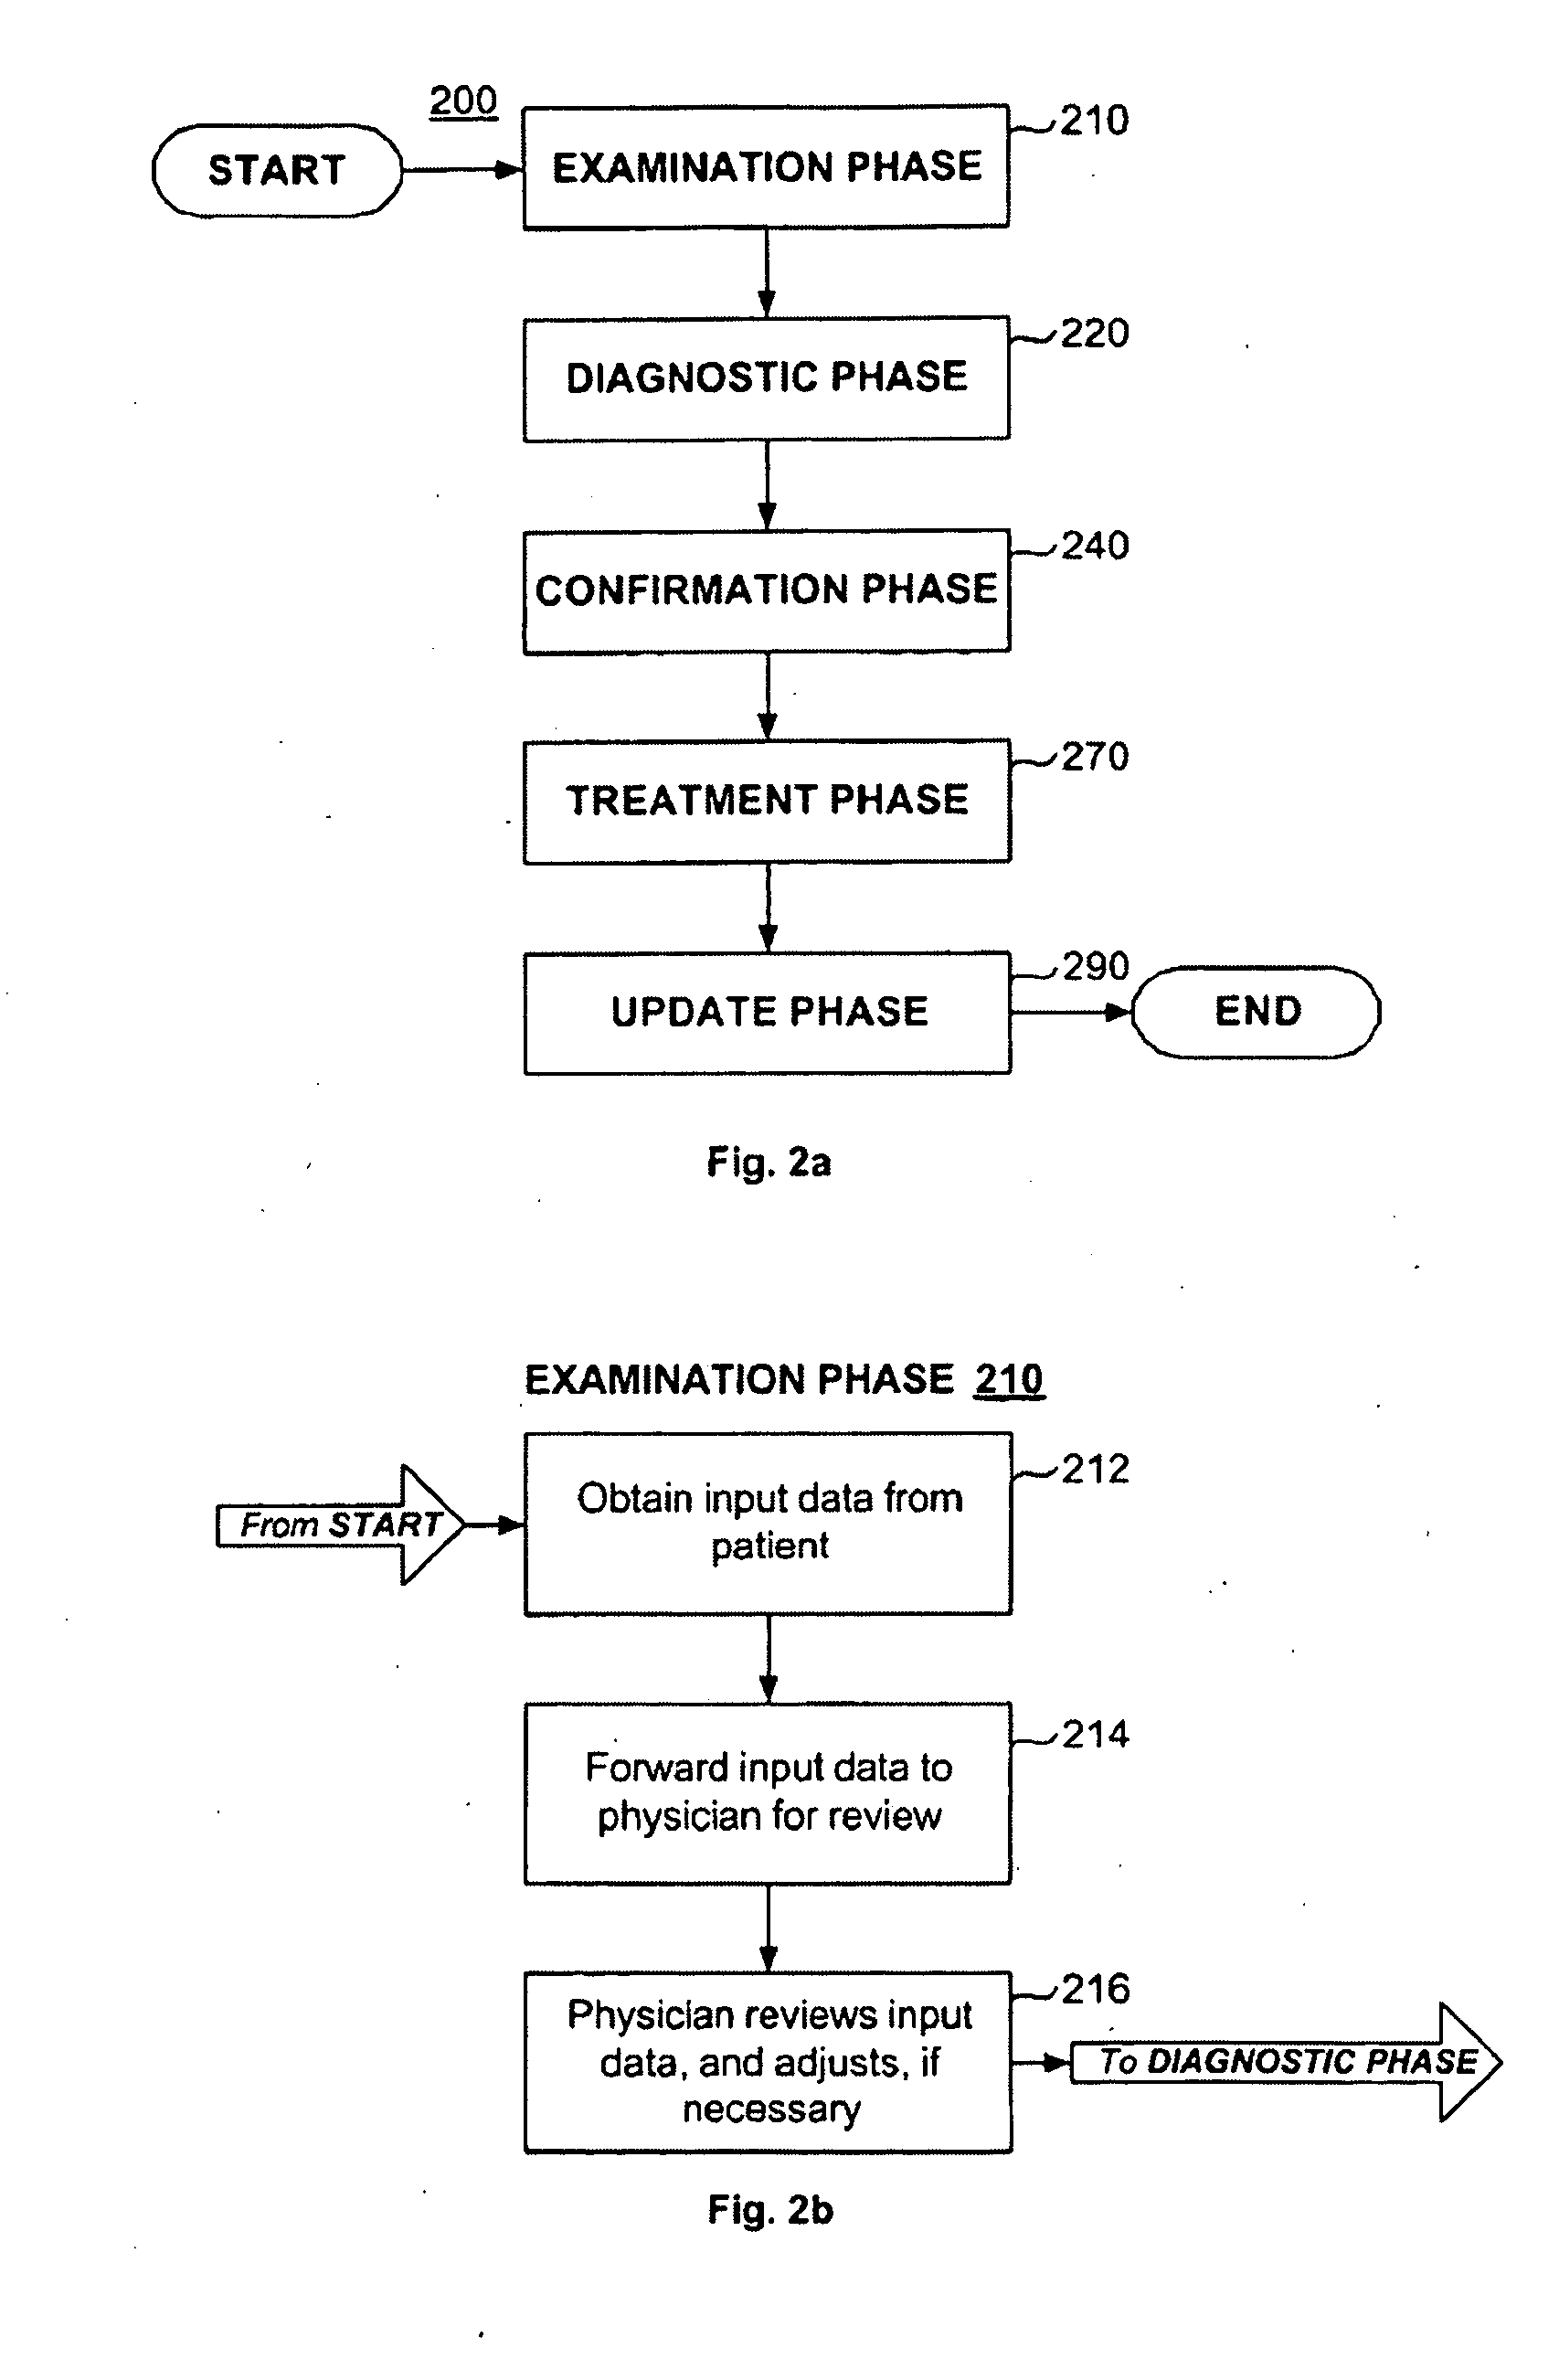 System and method for analyzing medical data to determine diagnosis and treatment